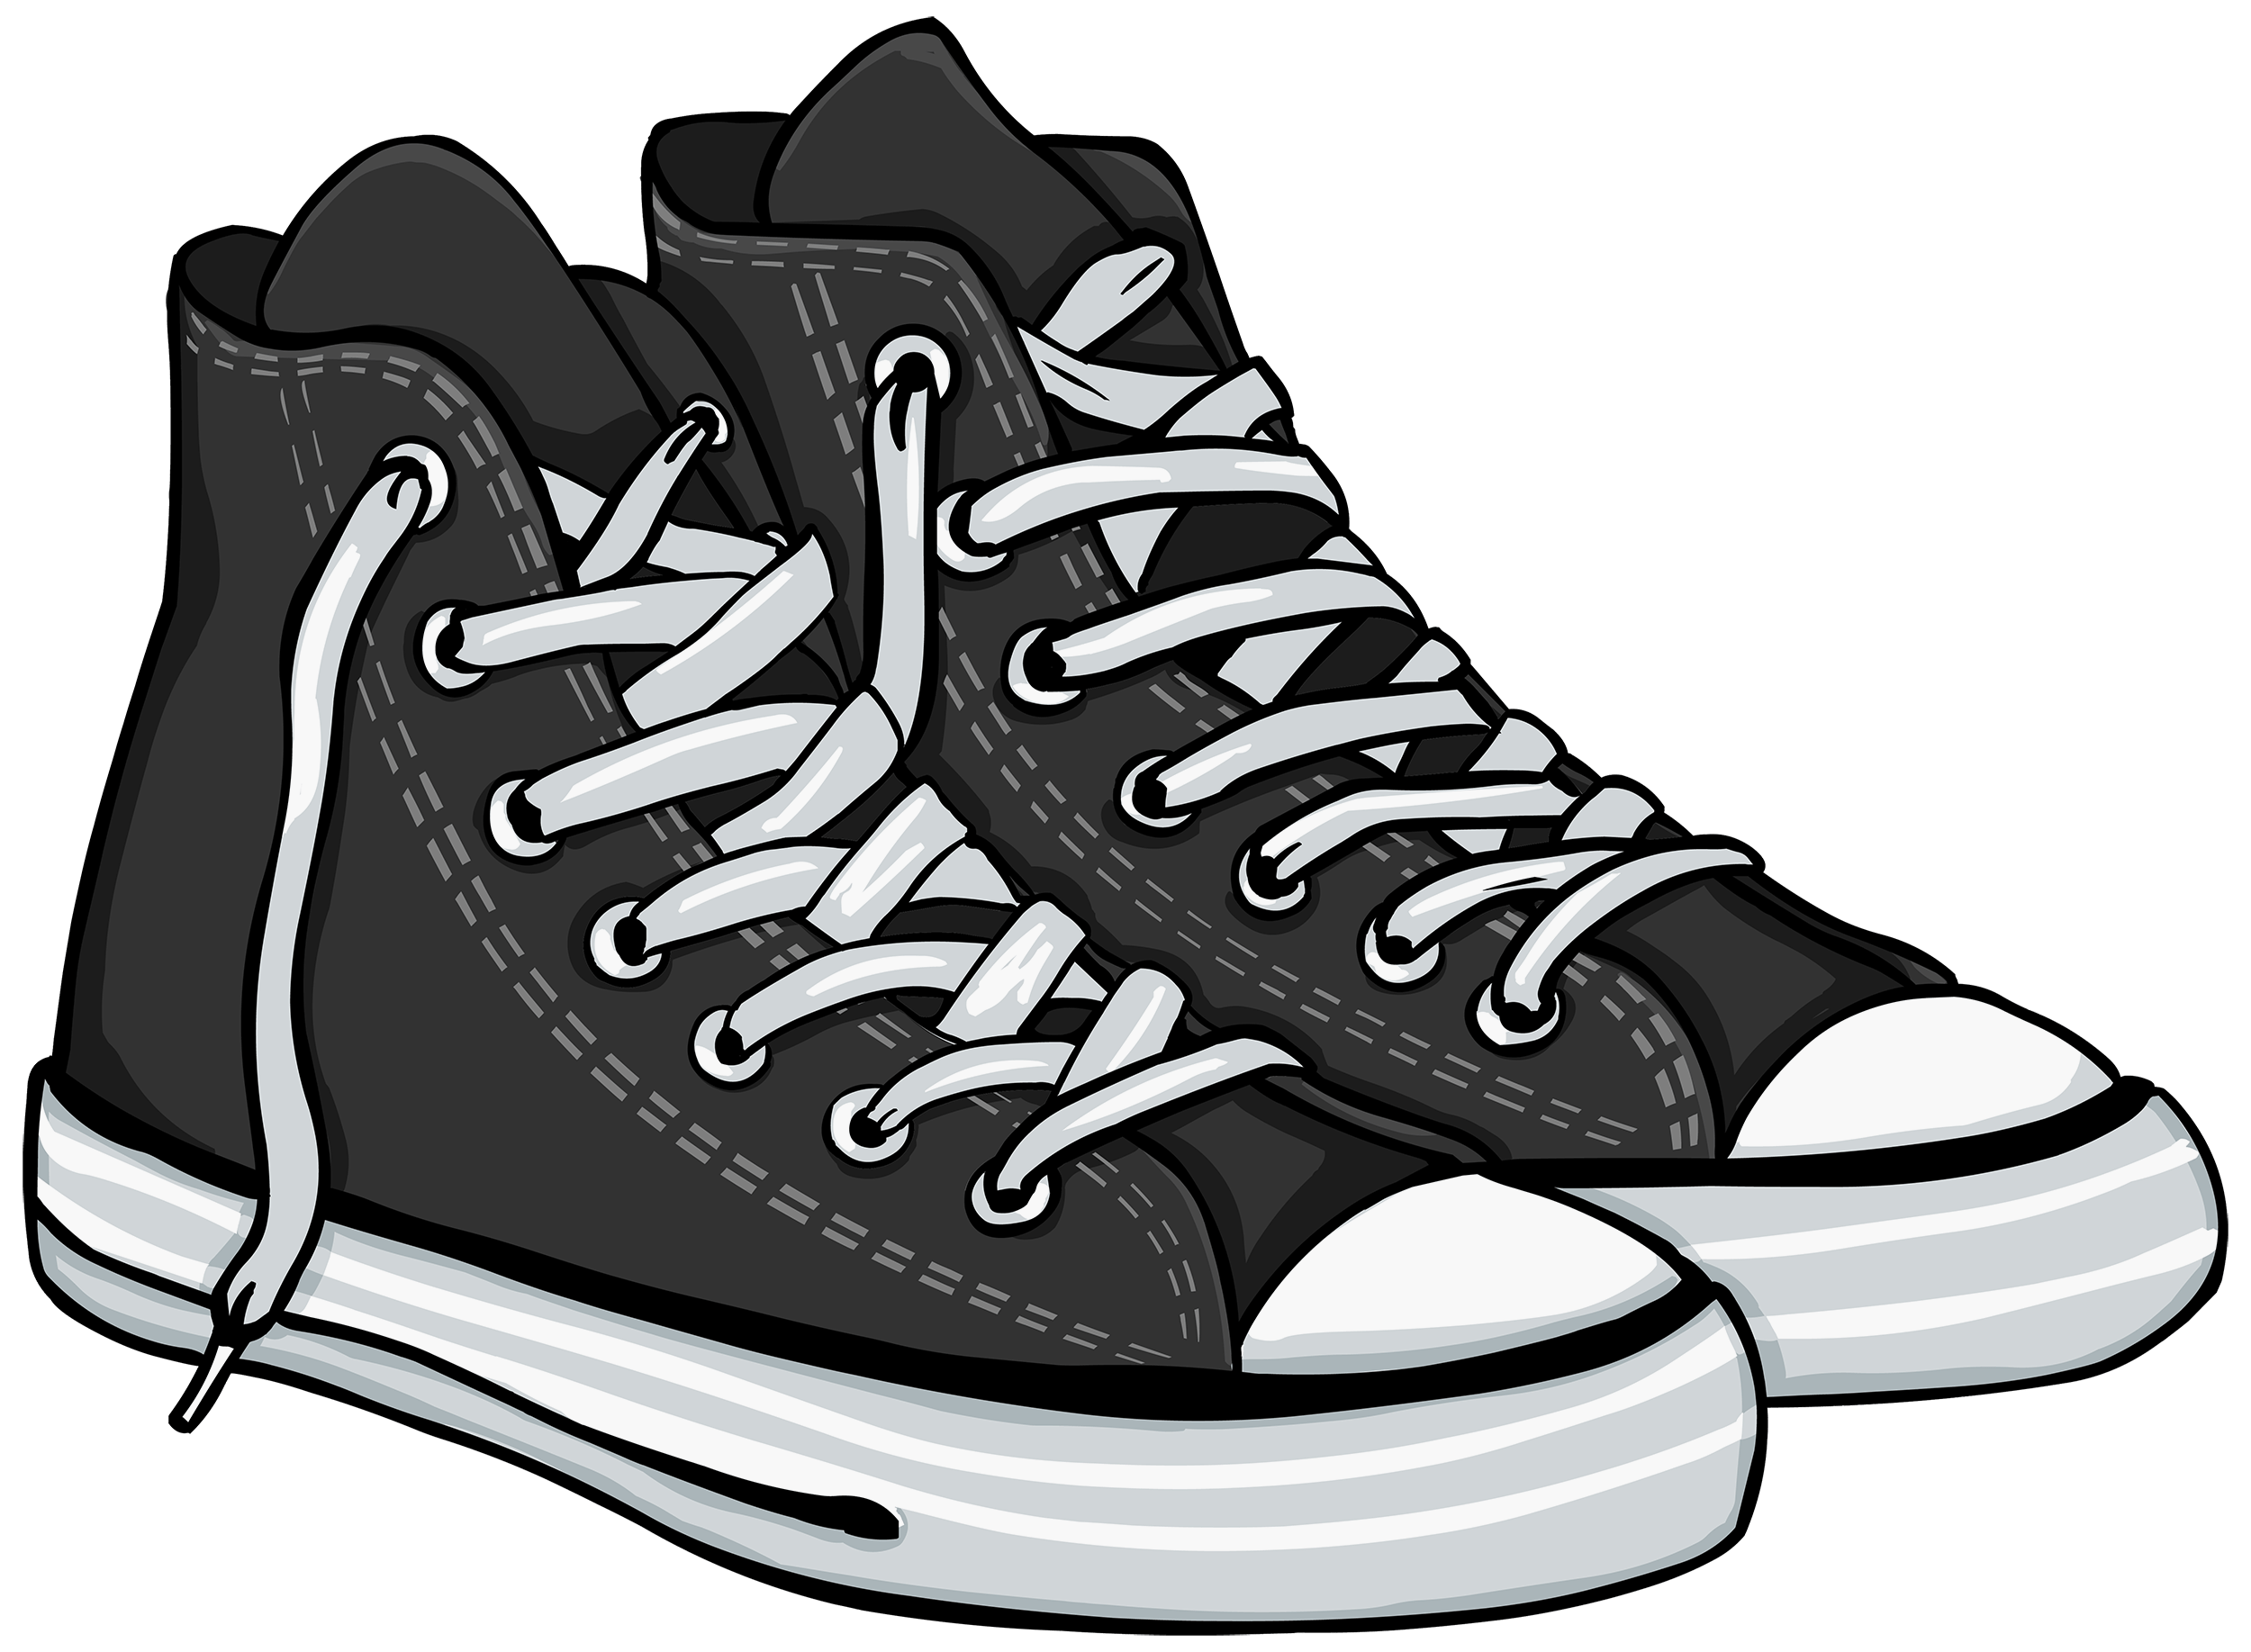 Pair of shoes clipart black and white